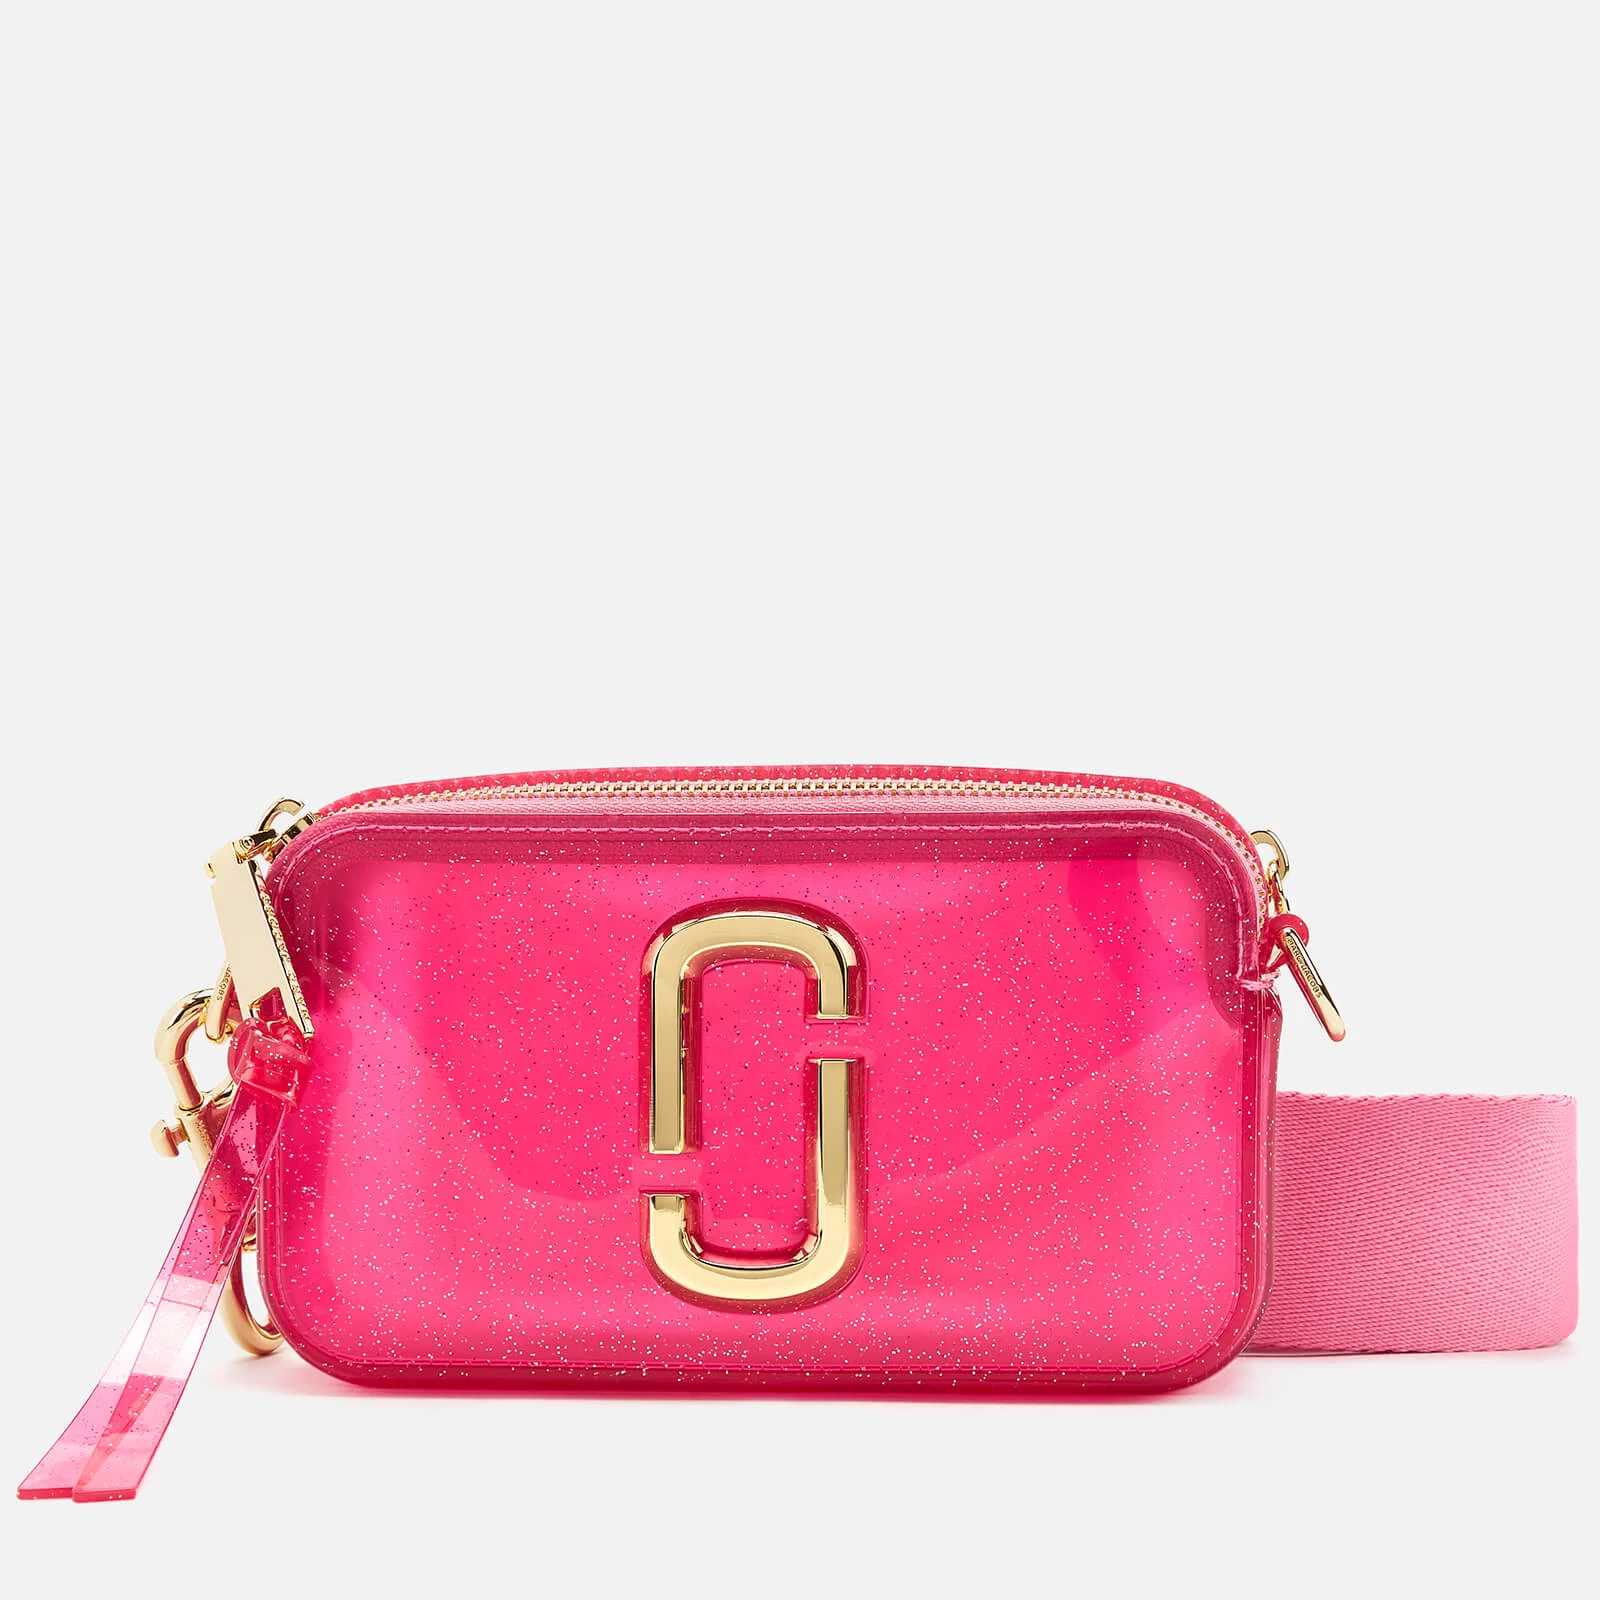 Marc Jacobs Women's The Jelly Glitter Snapshot Bag - Pink Multi Image 1